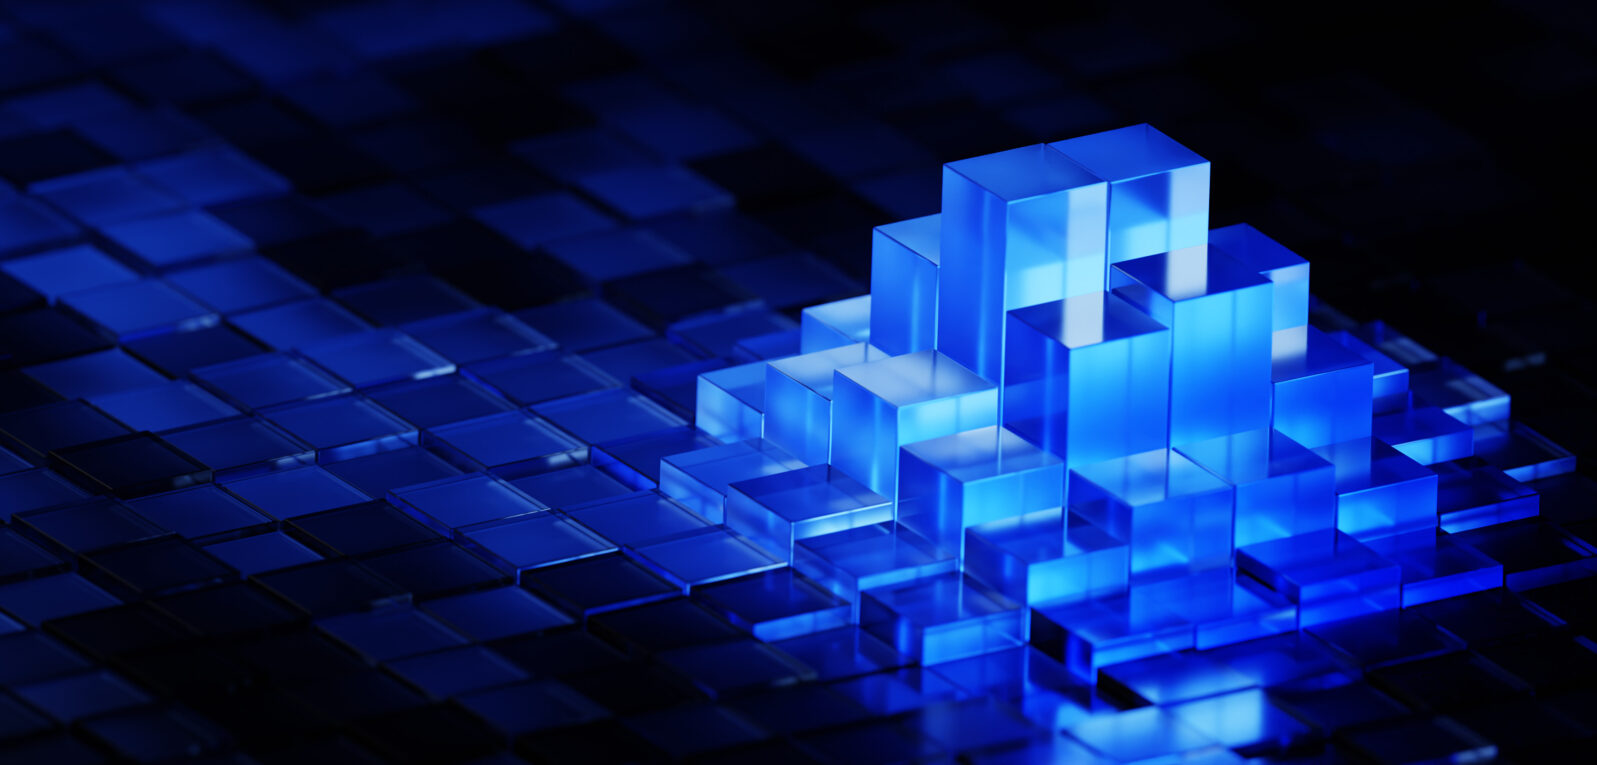 3d abstract render of blue glass cubes in grid forming data trend